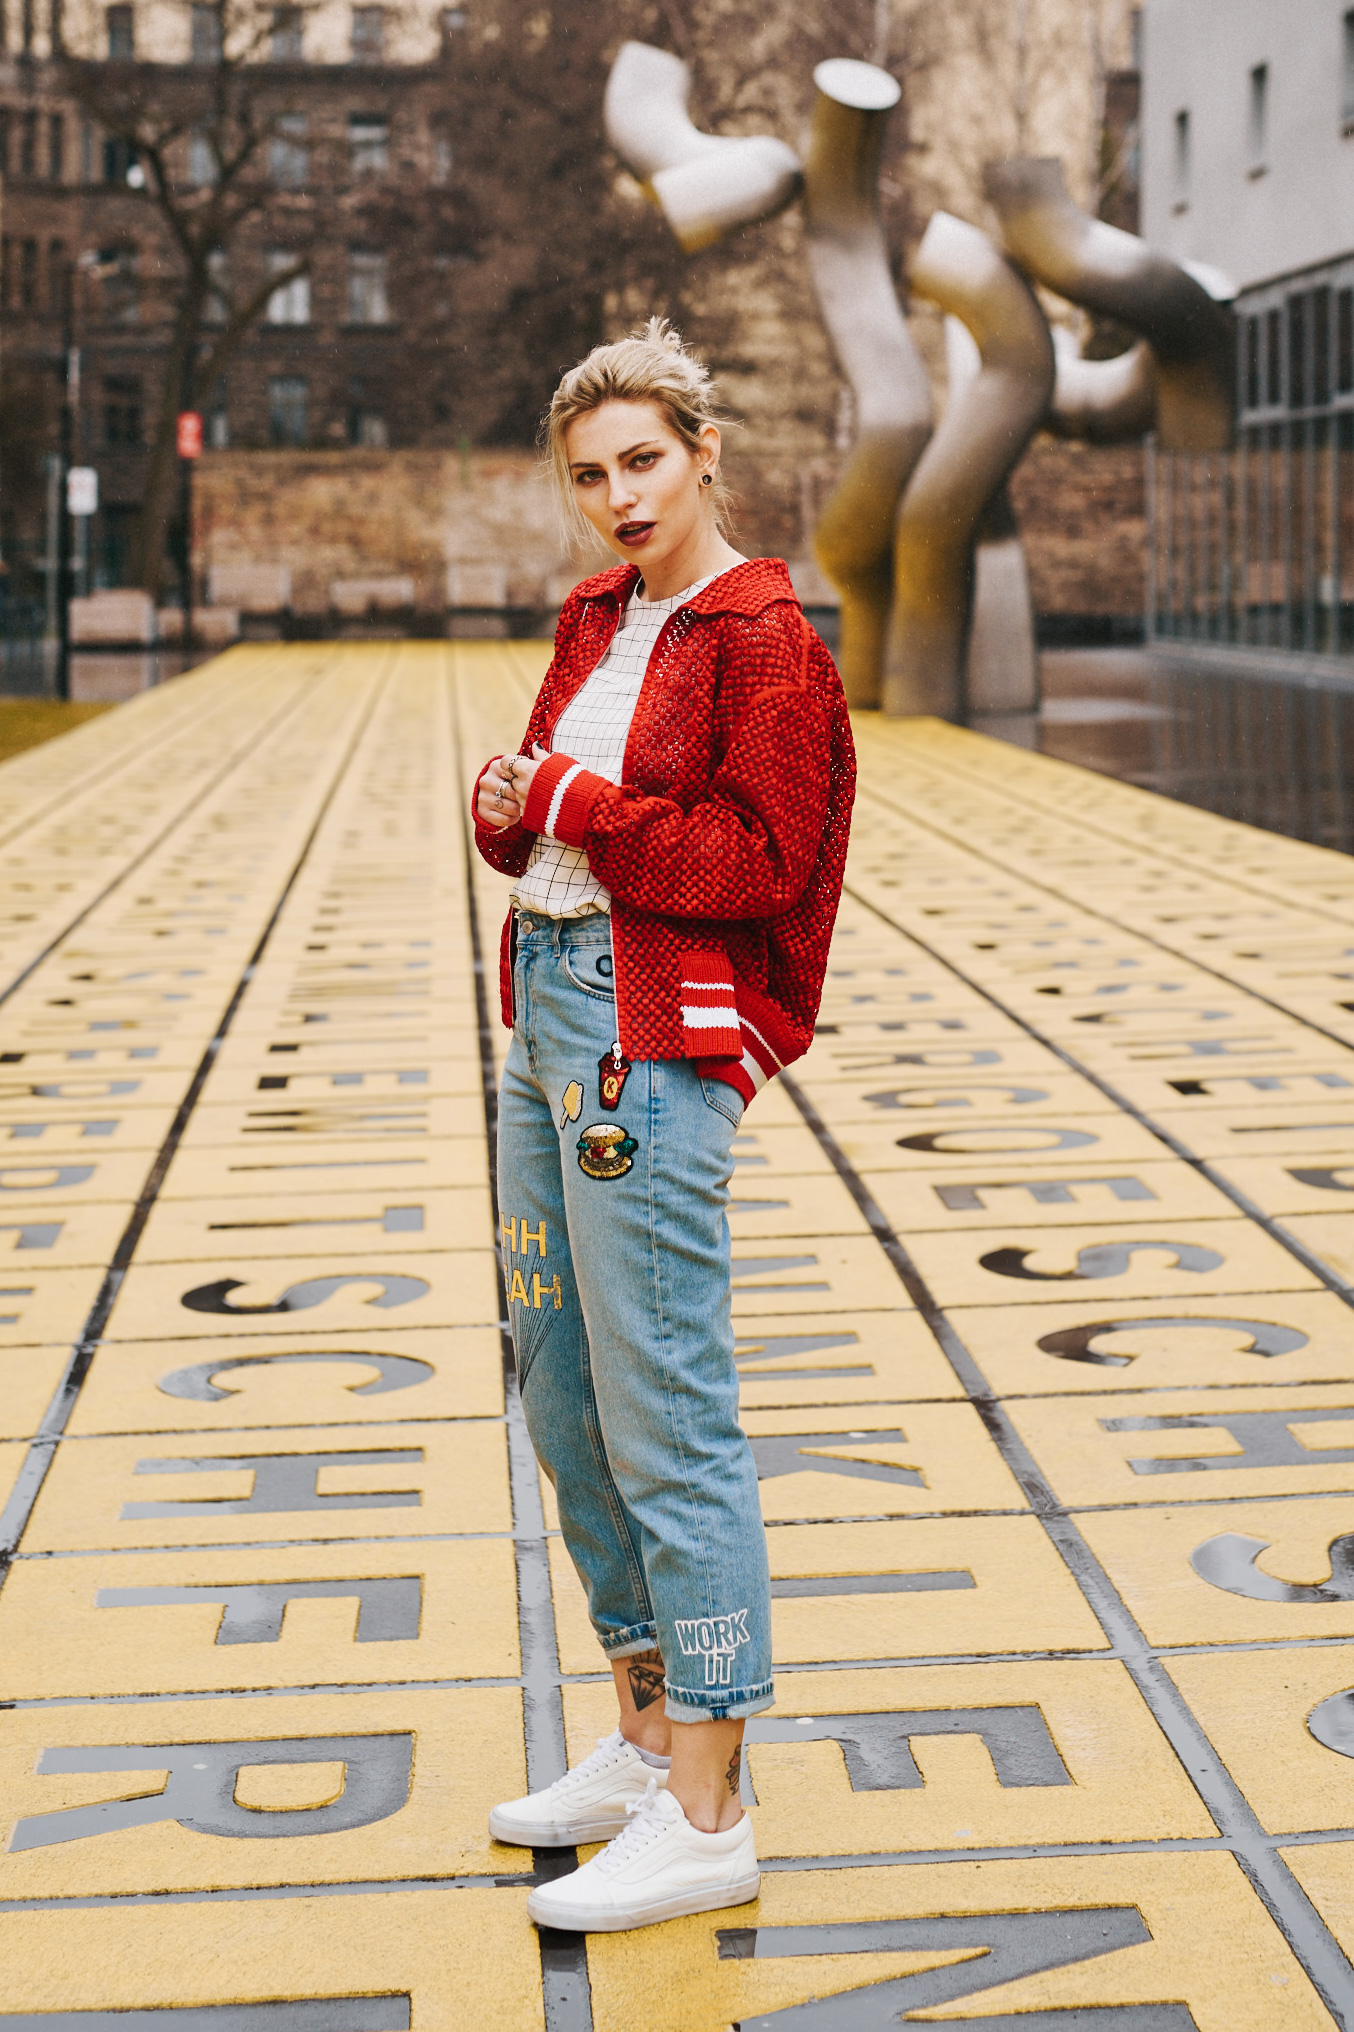 sporty and playful style | view more details on my blog | red bomber jacket from Gauchère, jeans with patches from Zara, white Vans sneakers | fashion and street style | Berlin